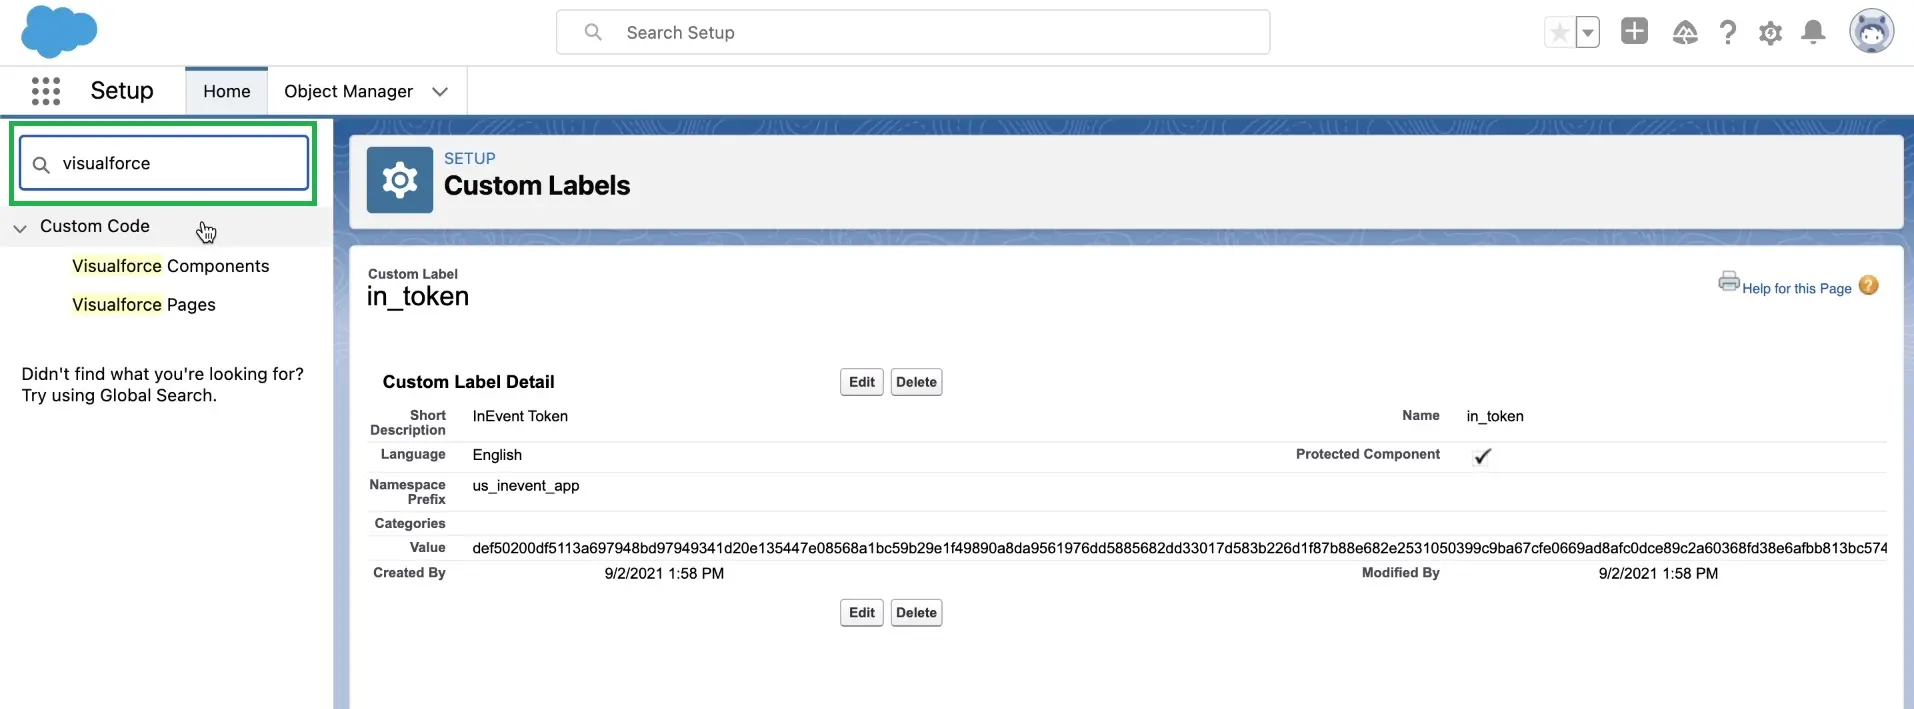 Visualforce on the search button